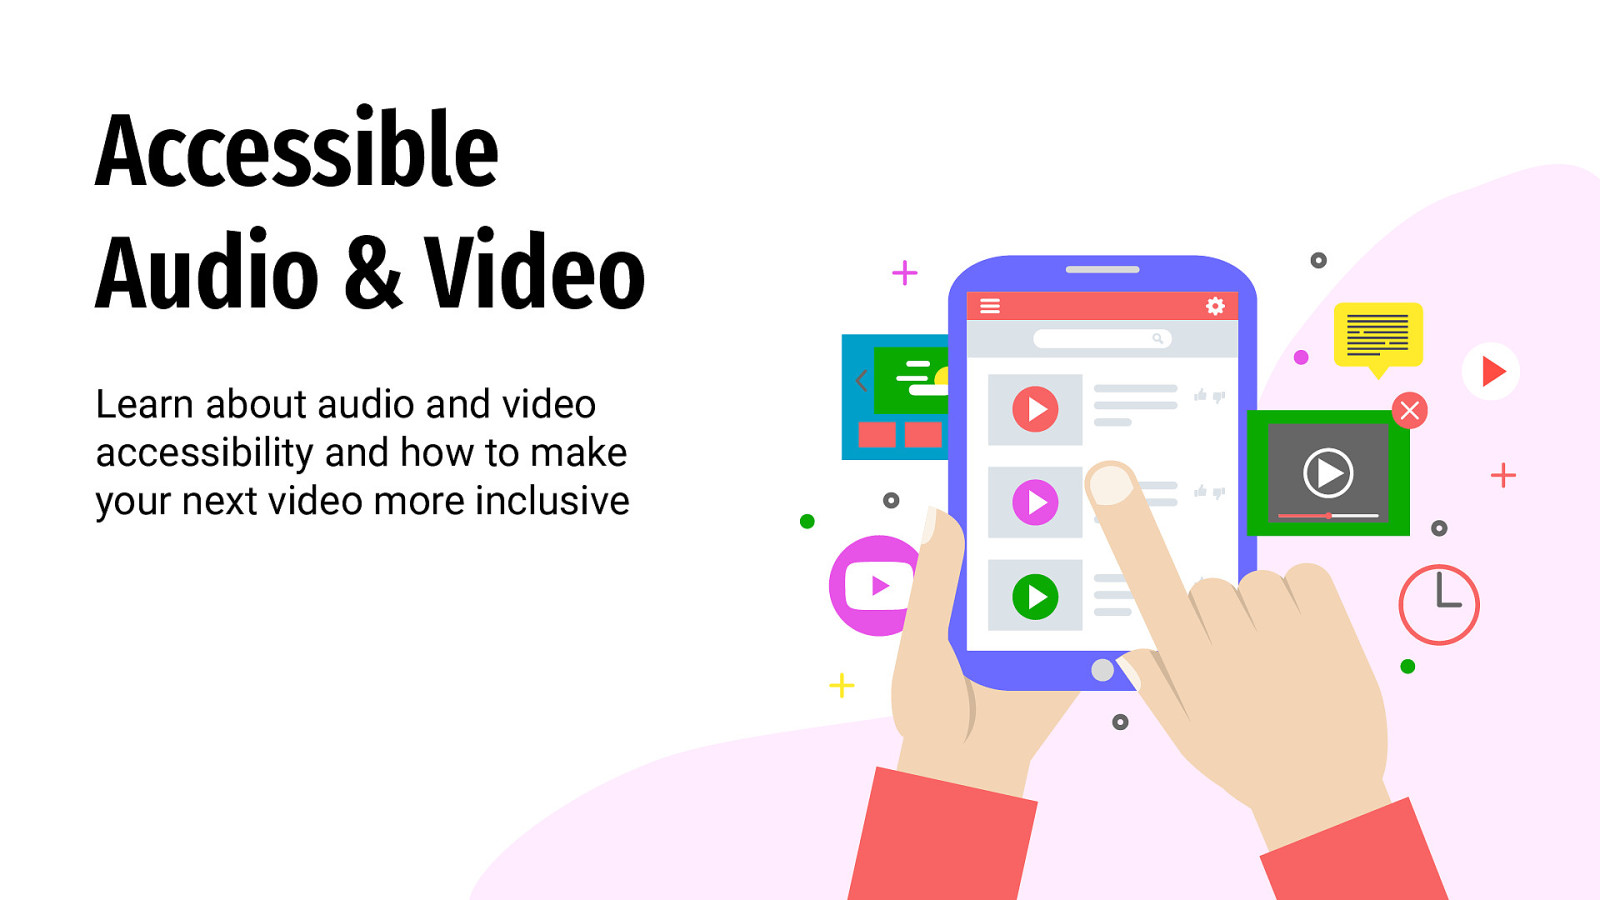 Accessible Audio & Video